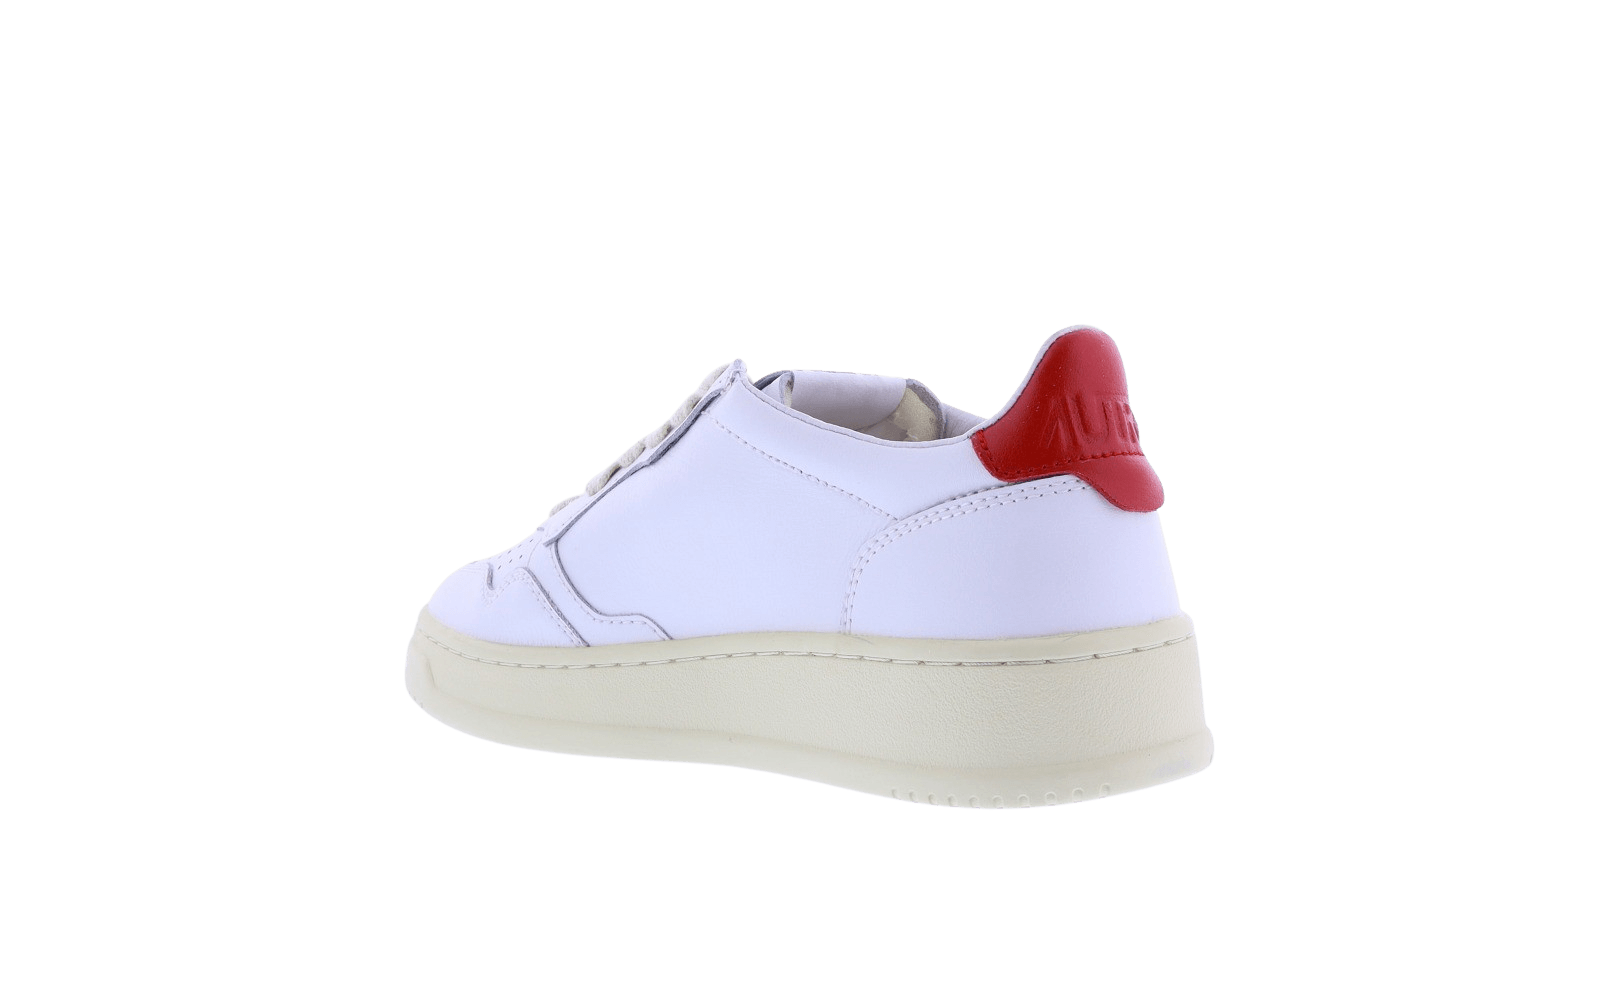 Women Autry 01 Low White/Red